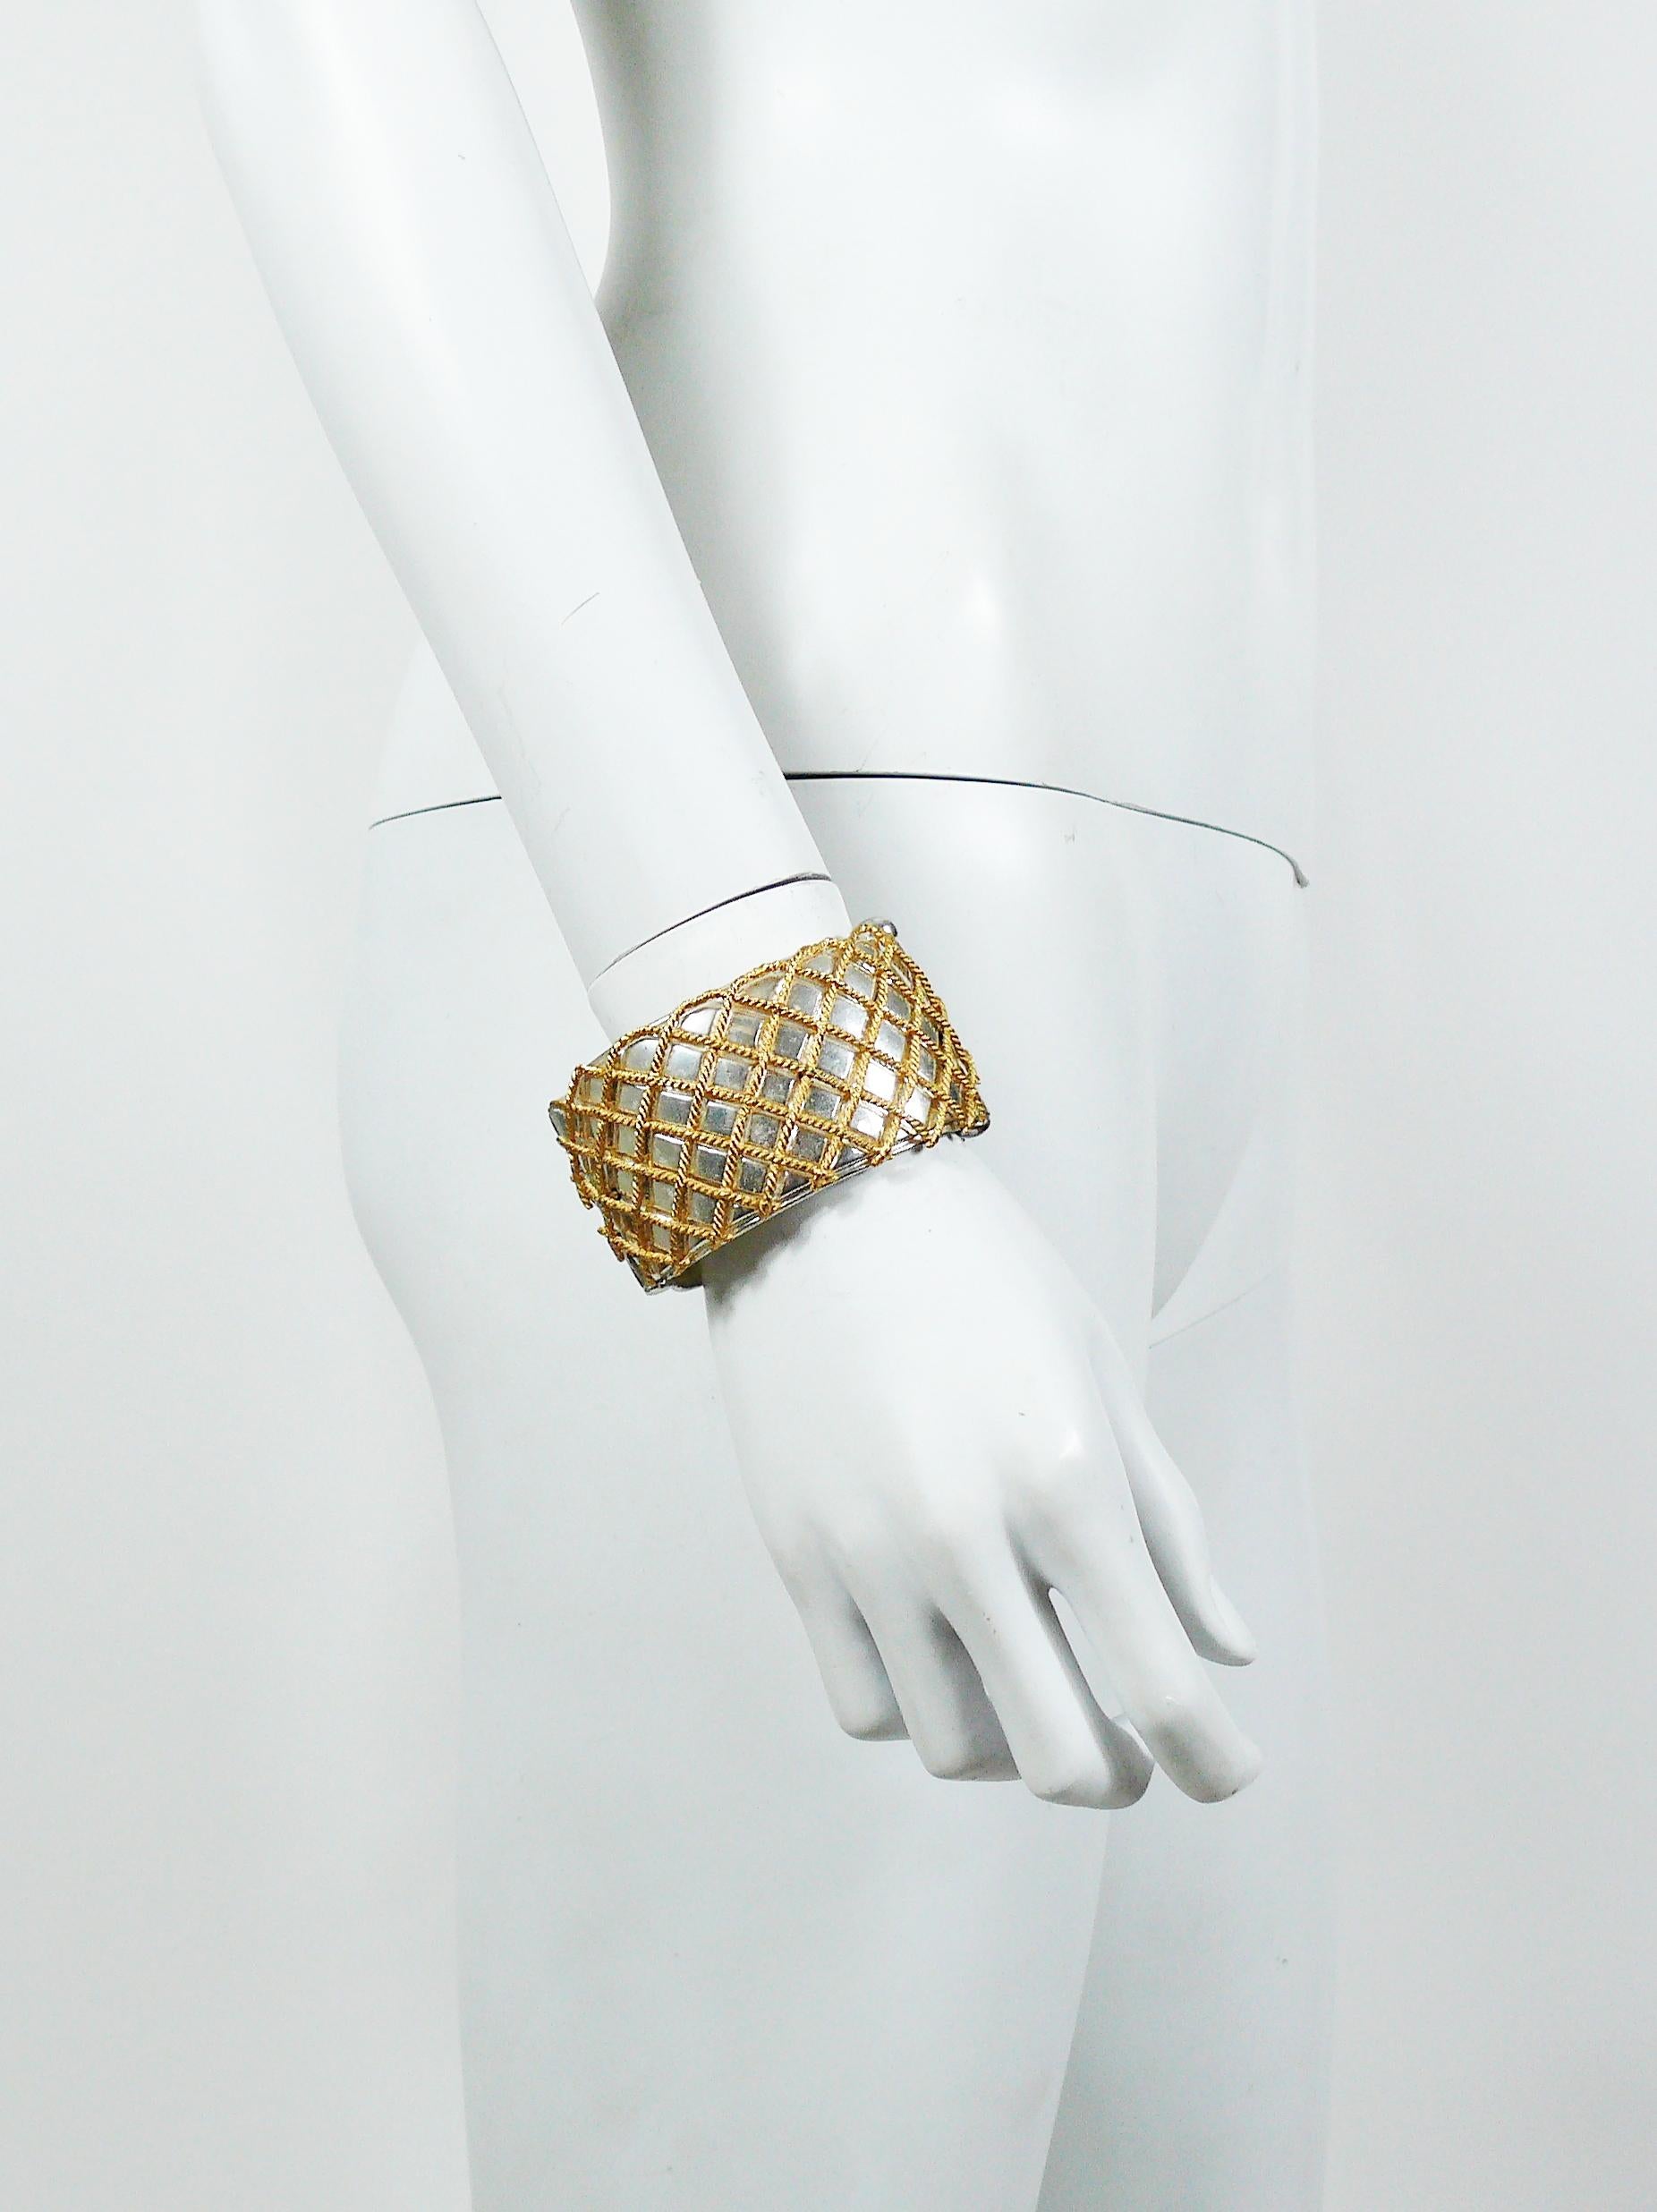 YVES SAINT LAURENT vintage two tone cuff bracelet featuring a grid design.

Embossed YSL Made in France.

Indicative measurements : inner length approx. 6.1 cm (2.40 inches) / inner width approx. 5.1 cm (2 inches) / height approx. 4 cm (1.57